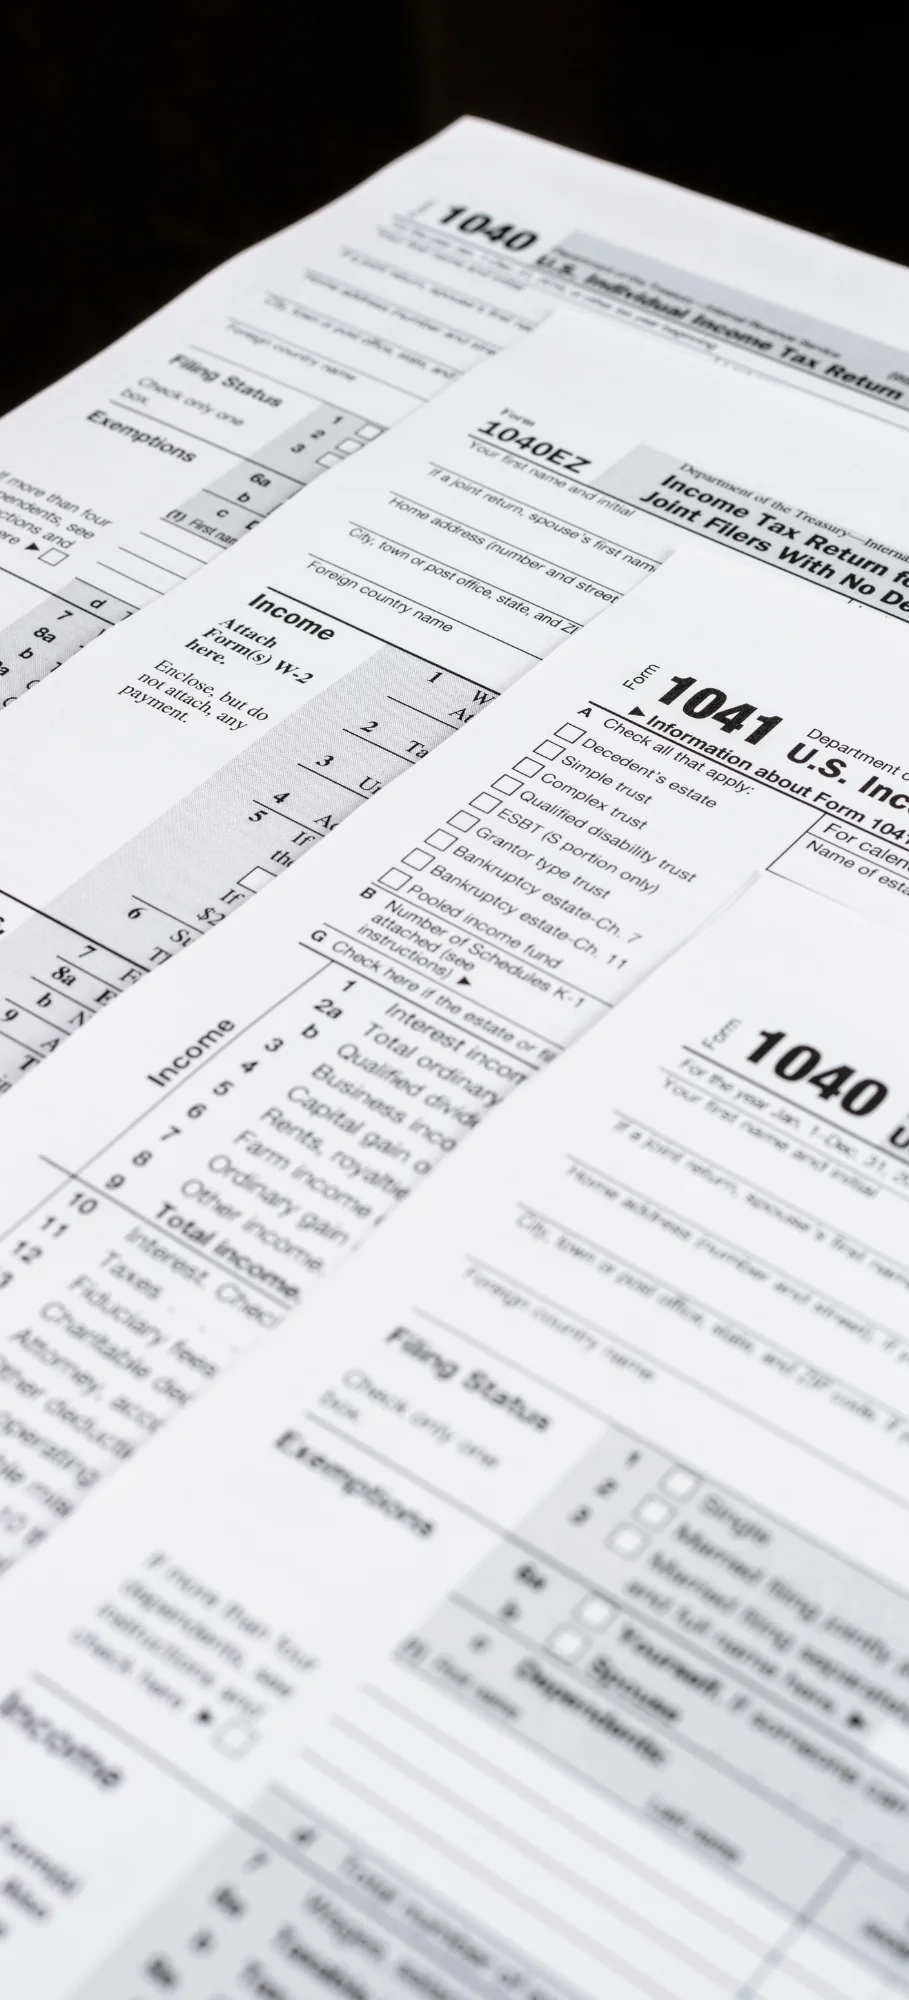 black and white image of a 1041 Income tax return form